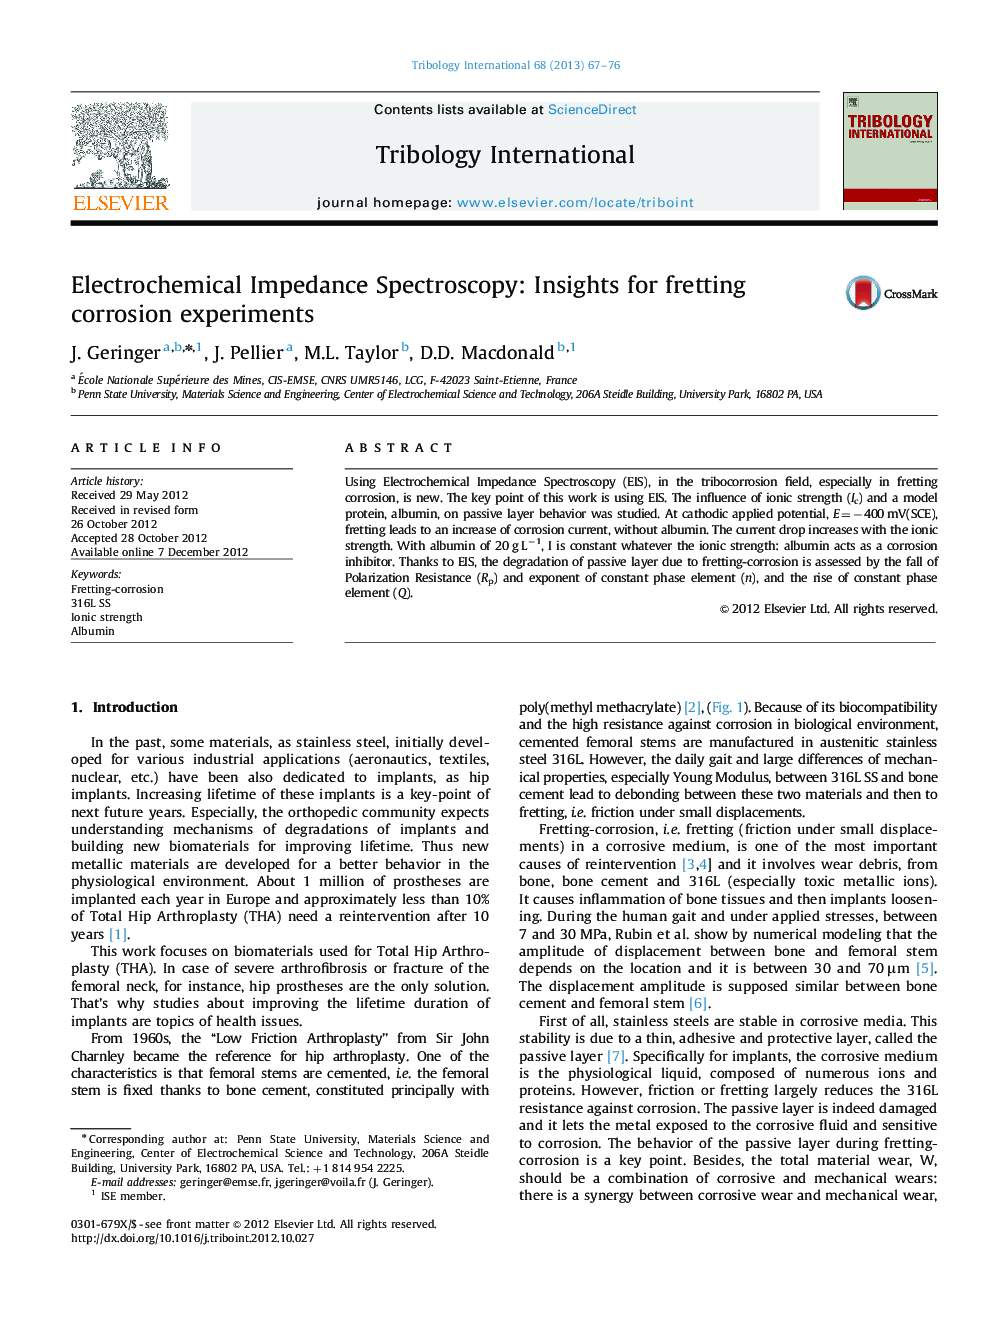 Electrochemical Impedance Spectroscopy: Insights for fretting corrosion experiments